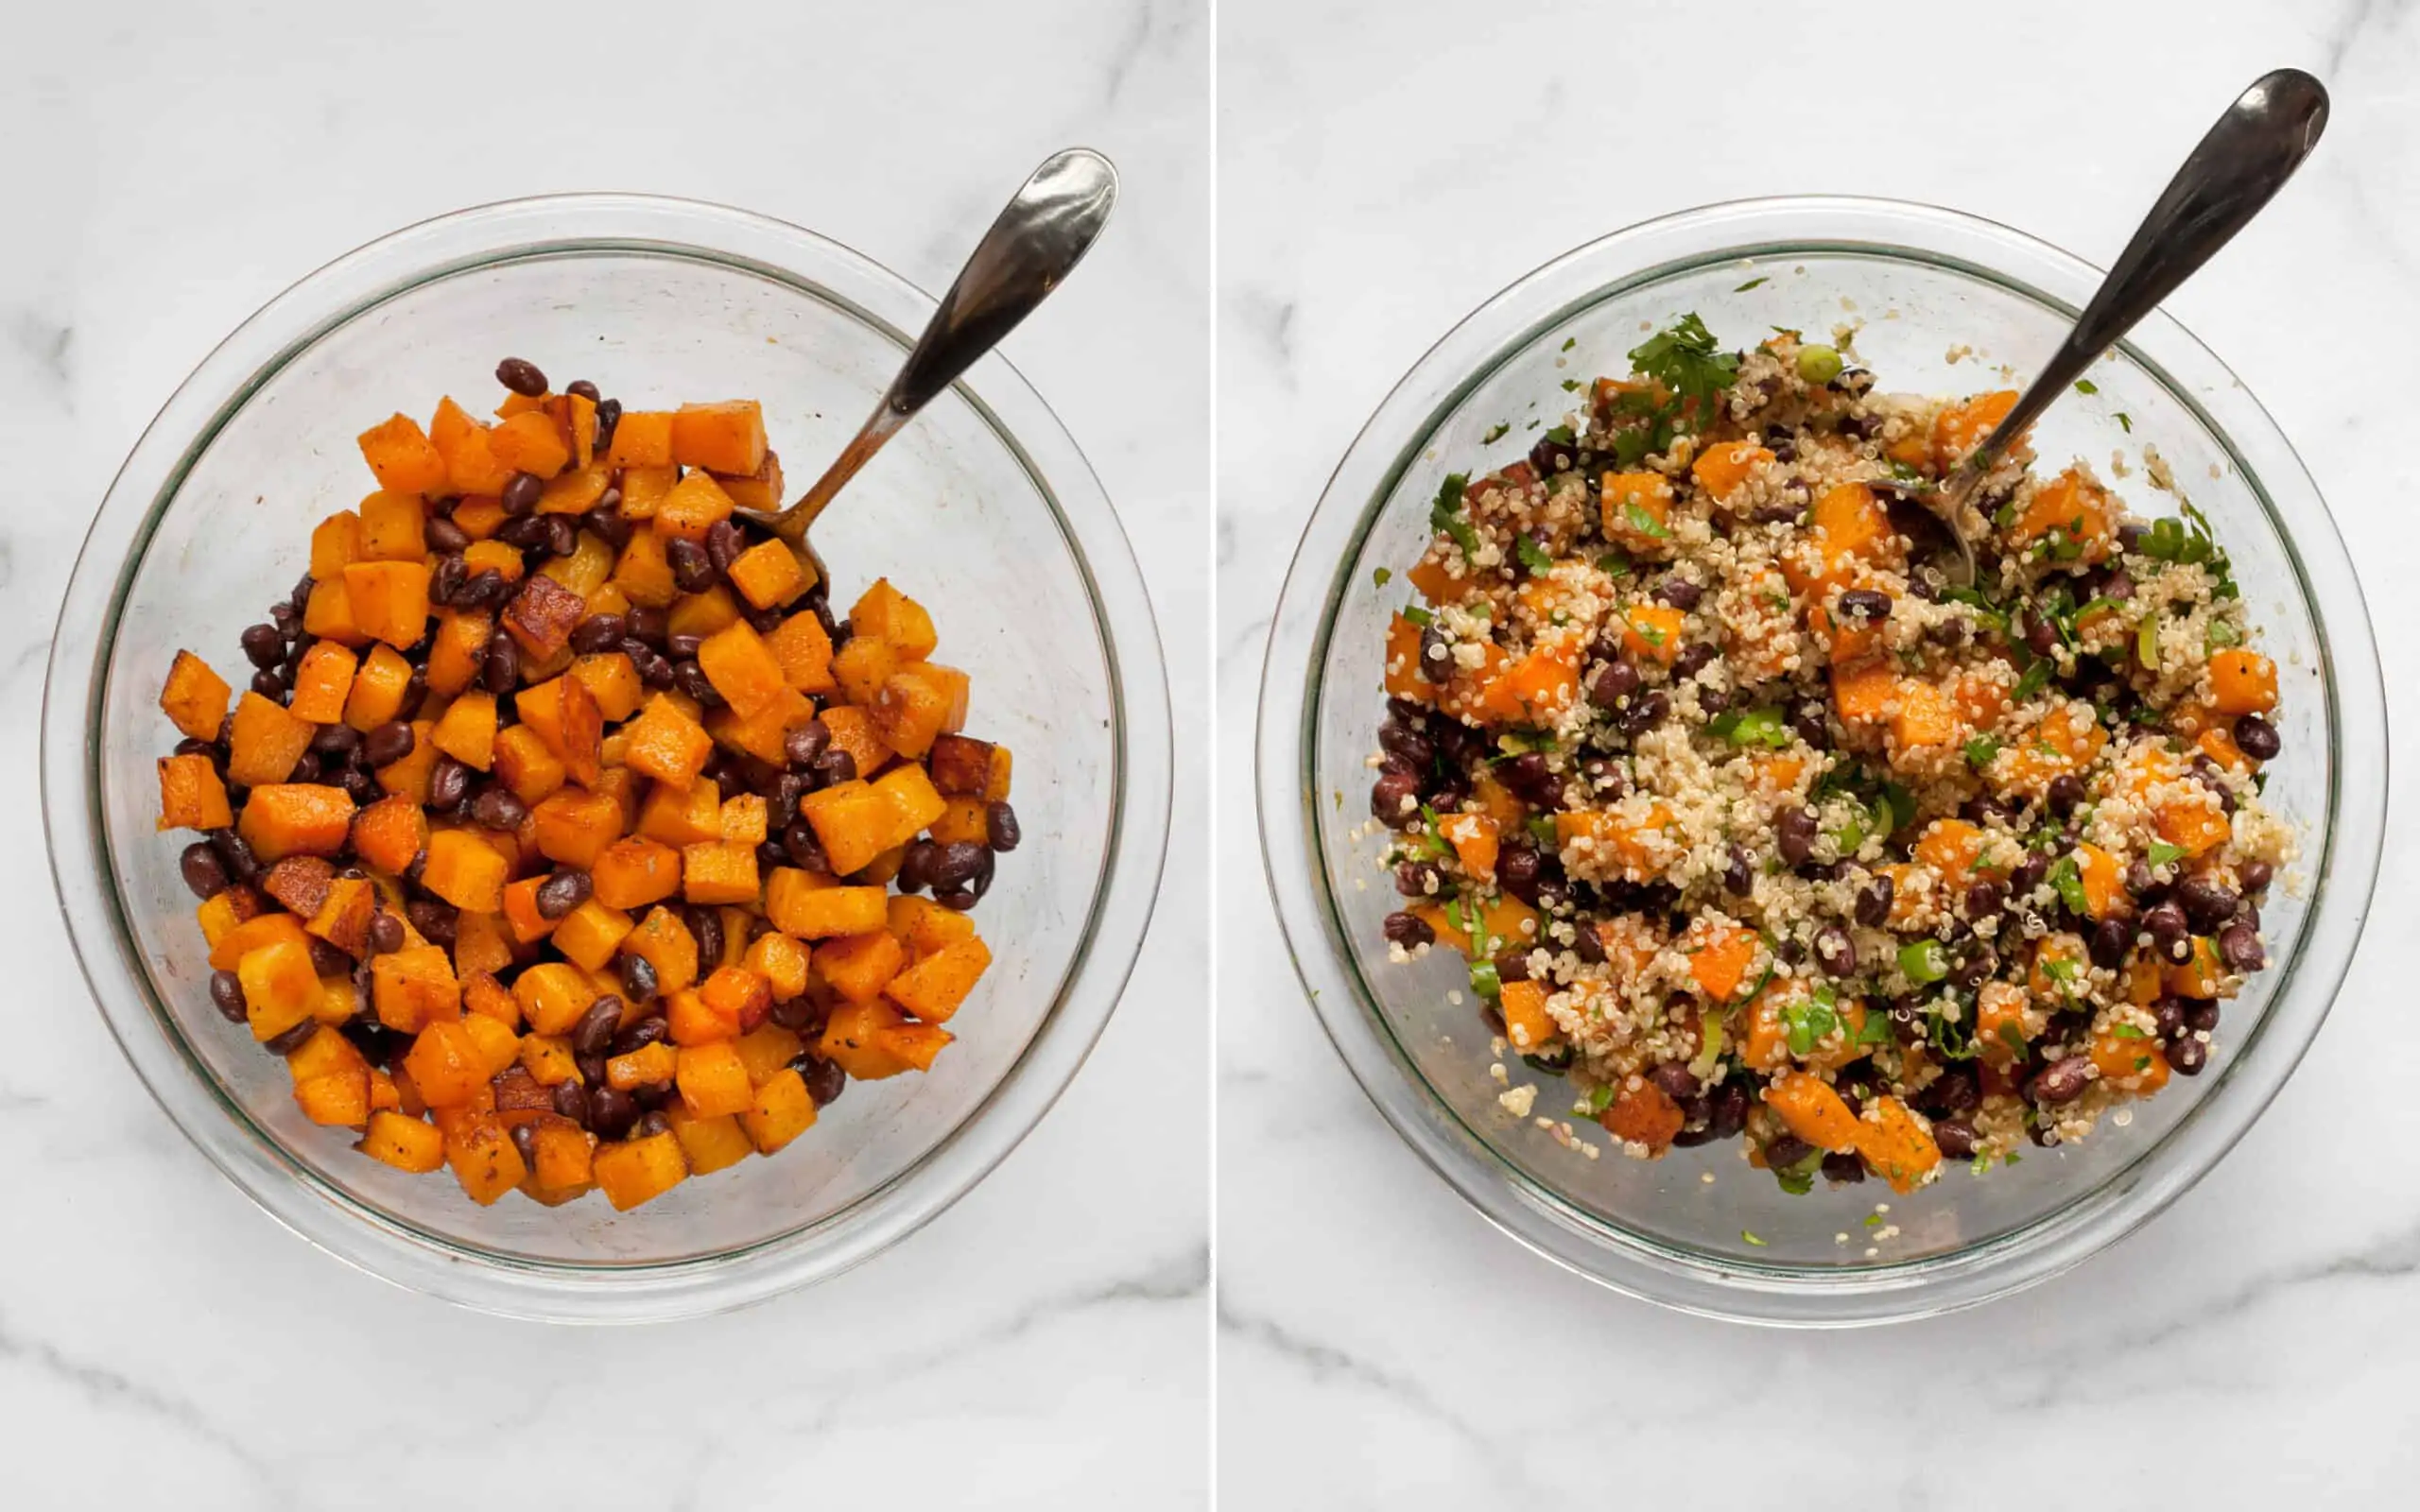 Combine the squash and beans in a bowl. Then stir in the quinoa, scallions and cilantro. 